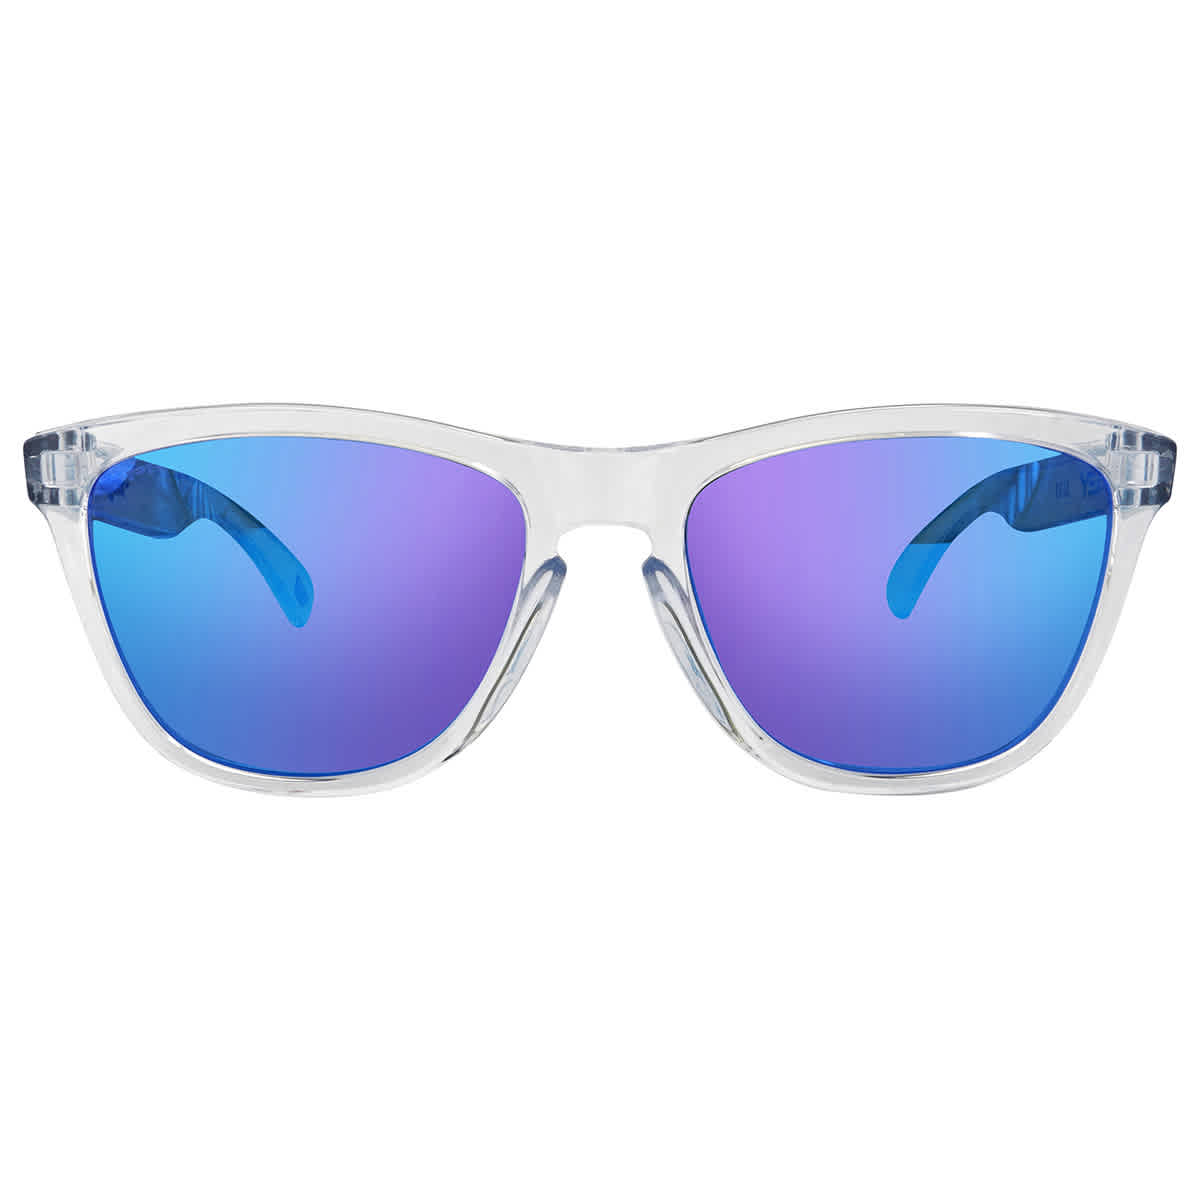 Oakley Frogskins Prizm Sapphire Square Unisex Sunglasses OO9013 9013D0 55 - image 1 of 3